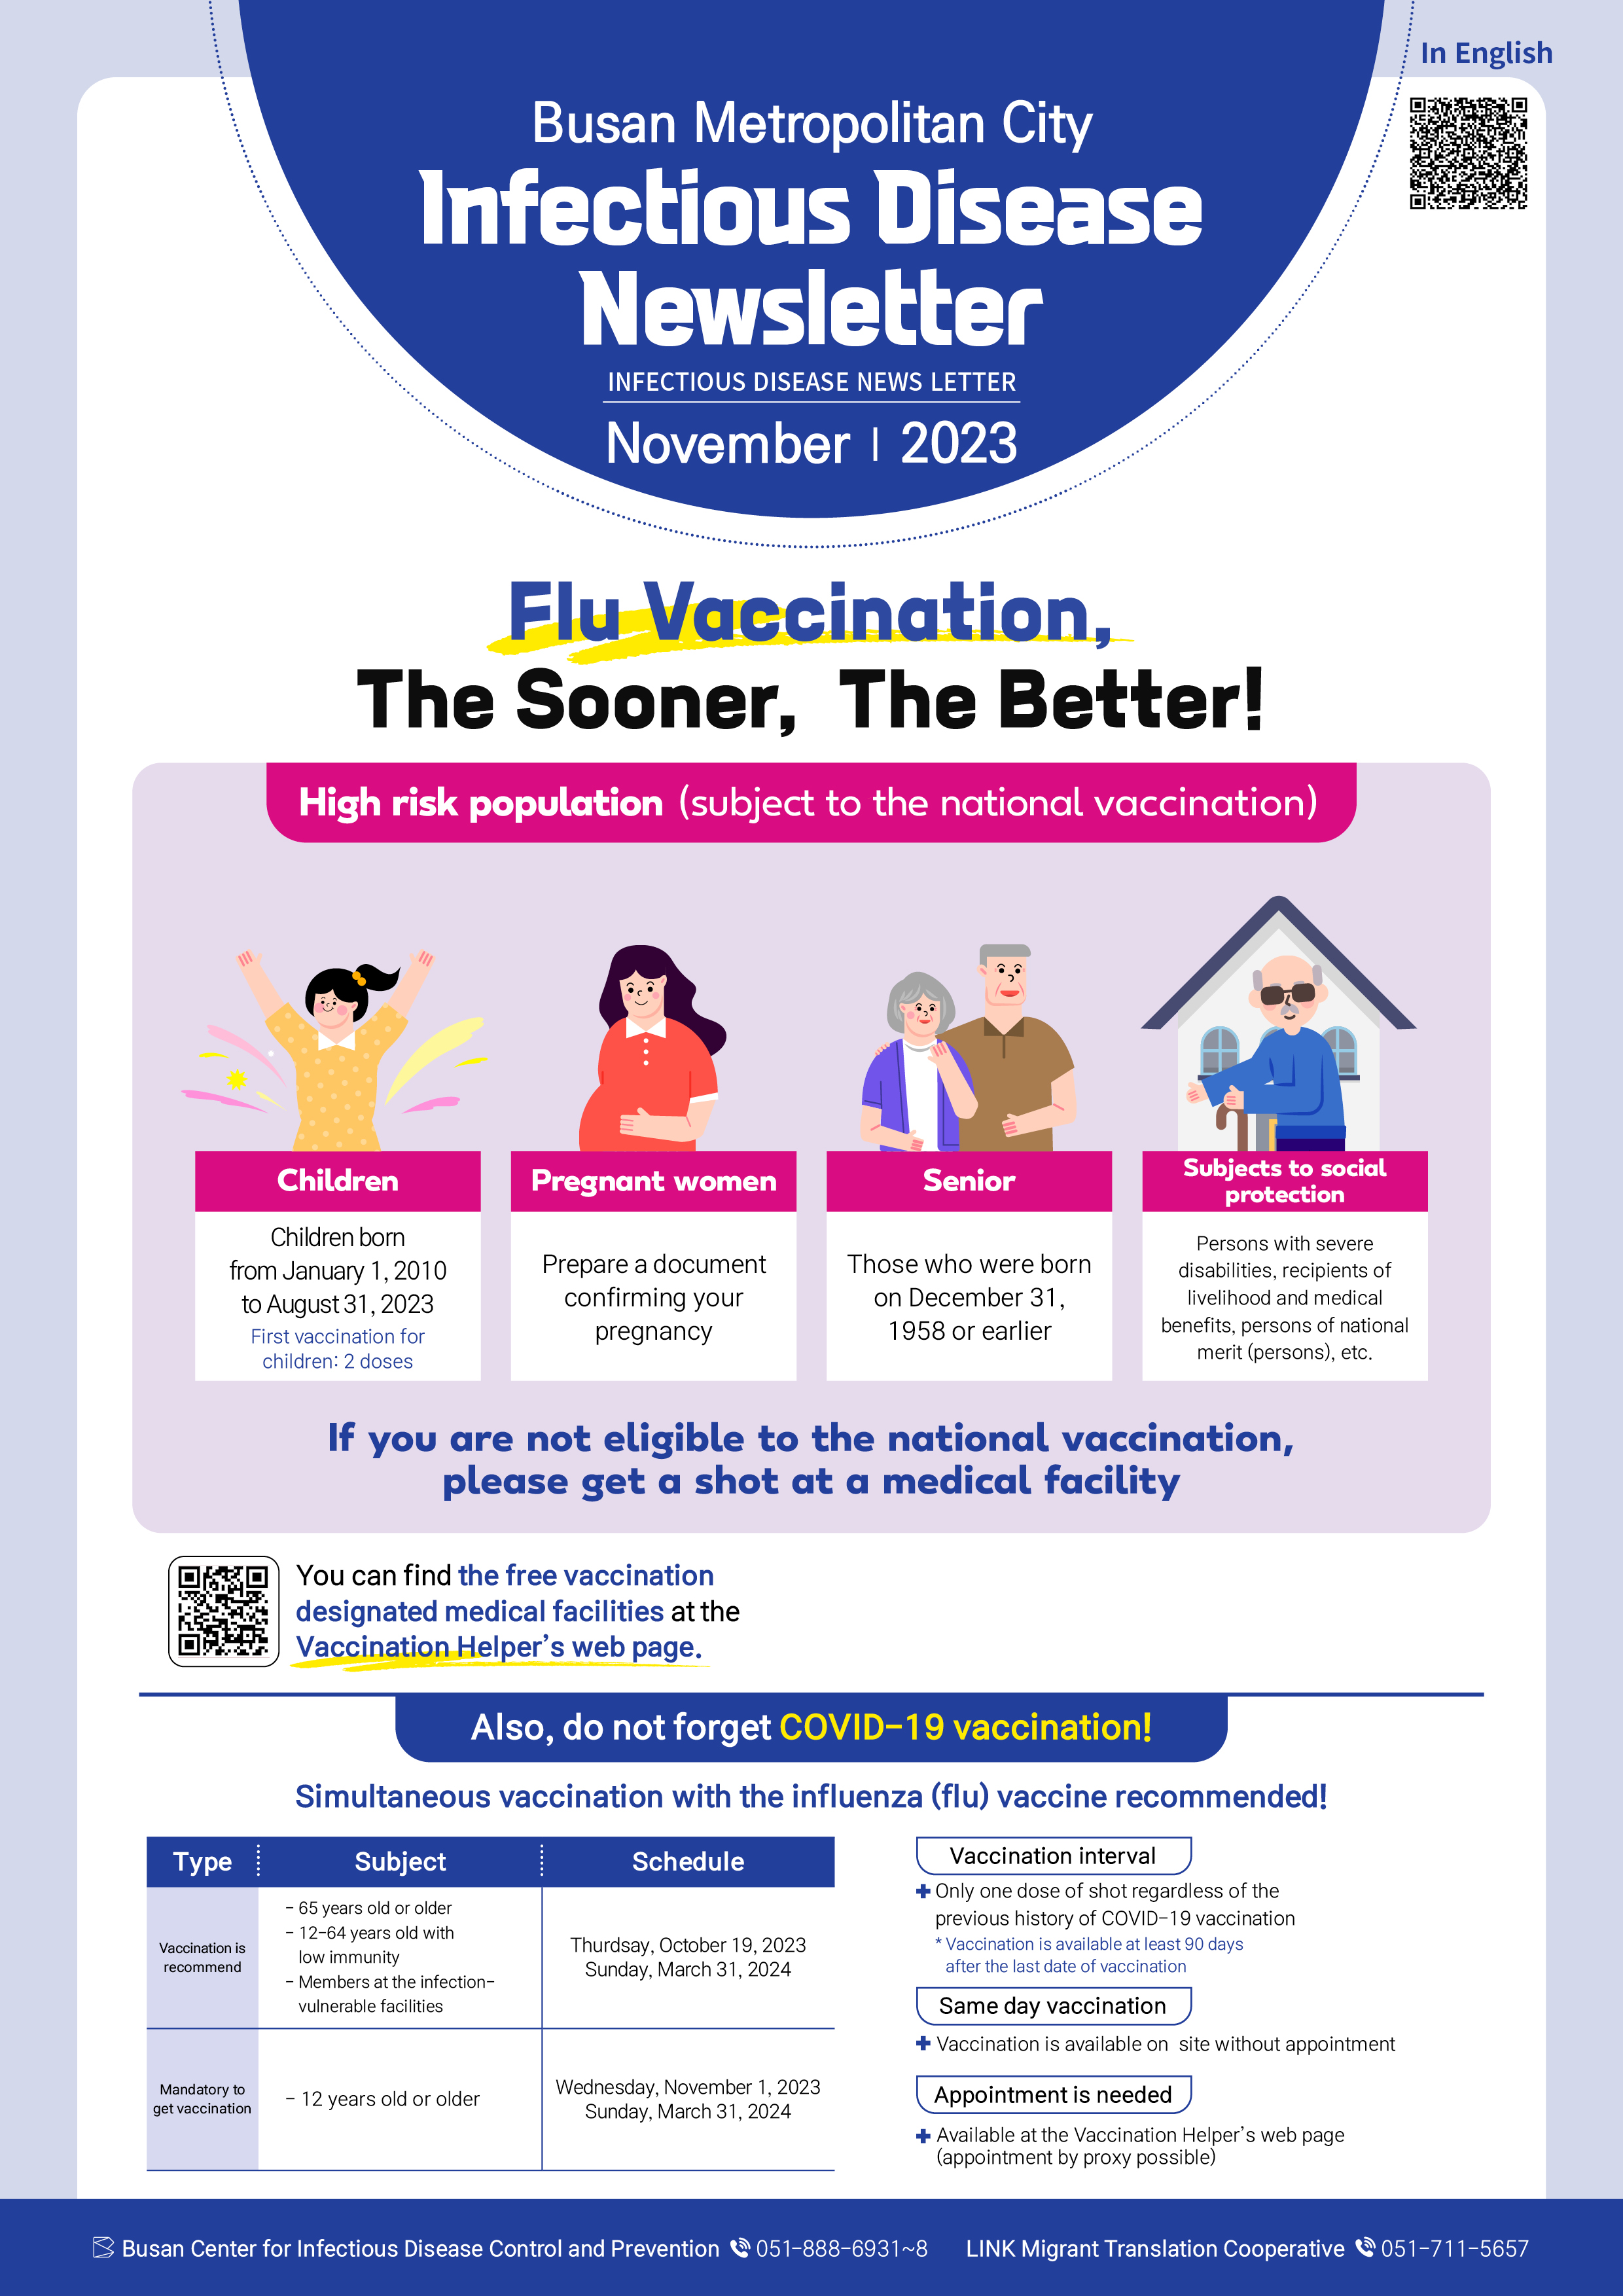 Infectious Disease Newsletter (Nov. 2023) in English